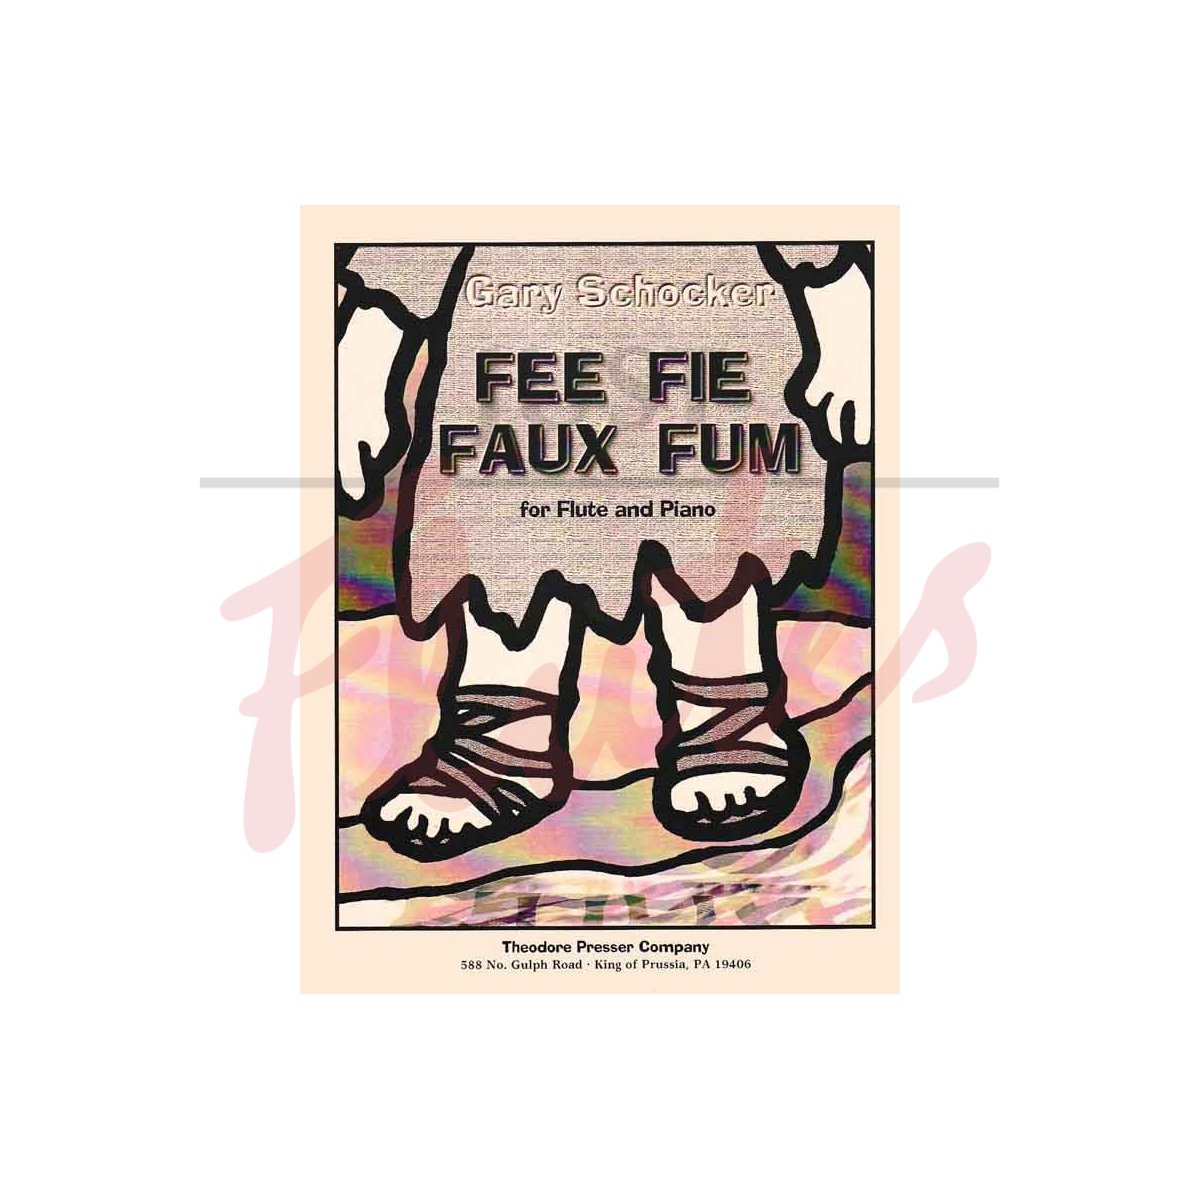 Fee Fie Faux Fum for Flute and Piano